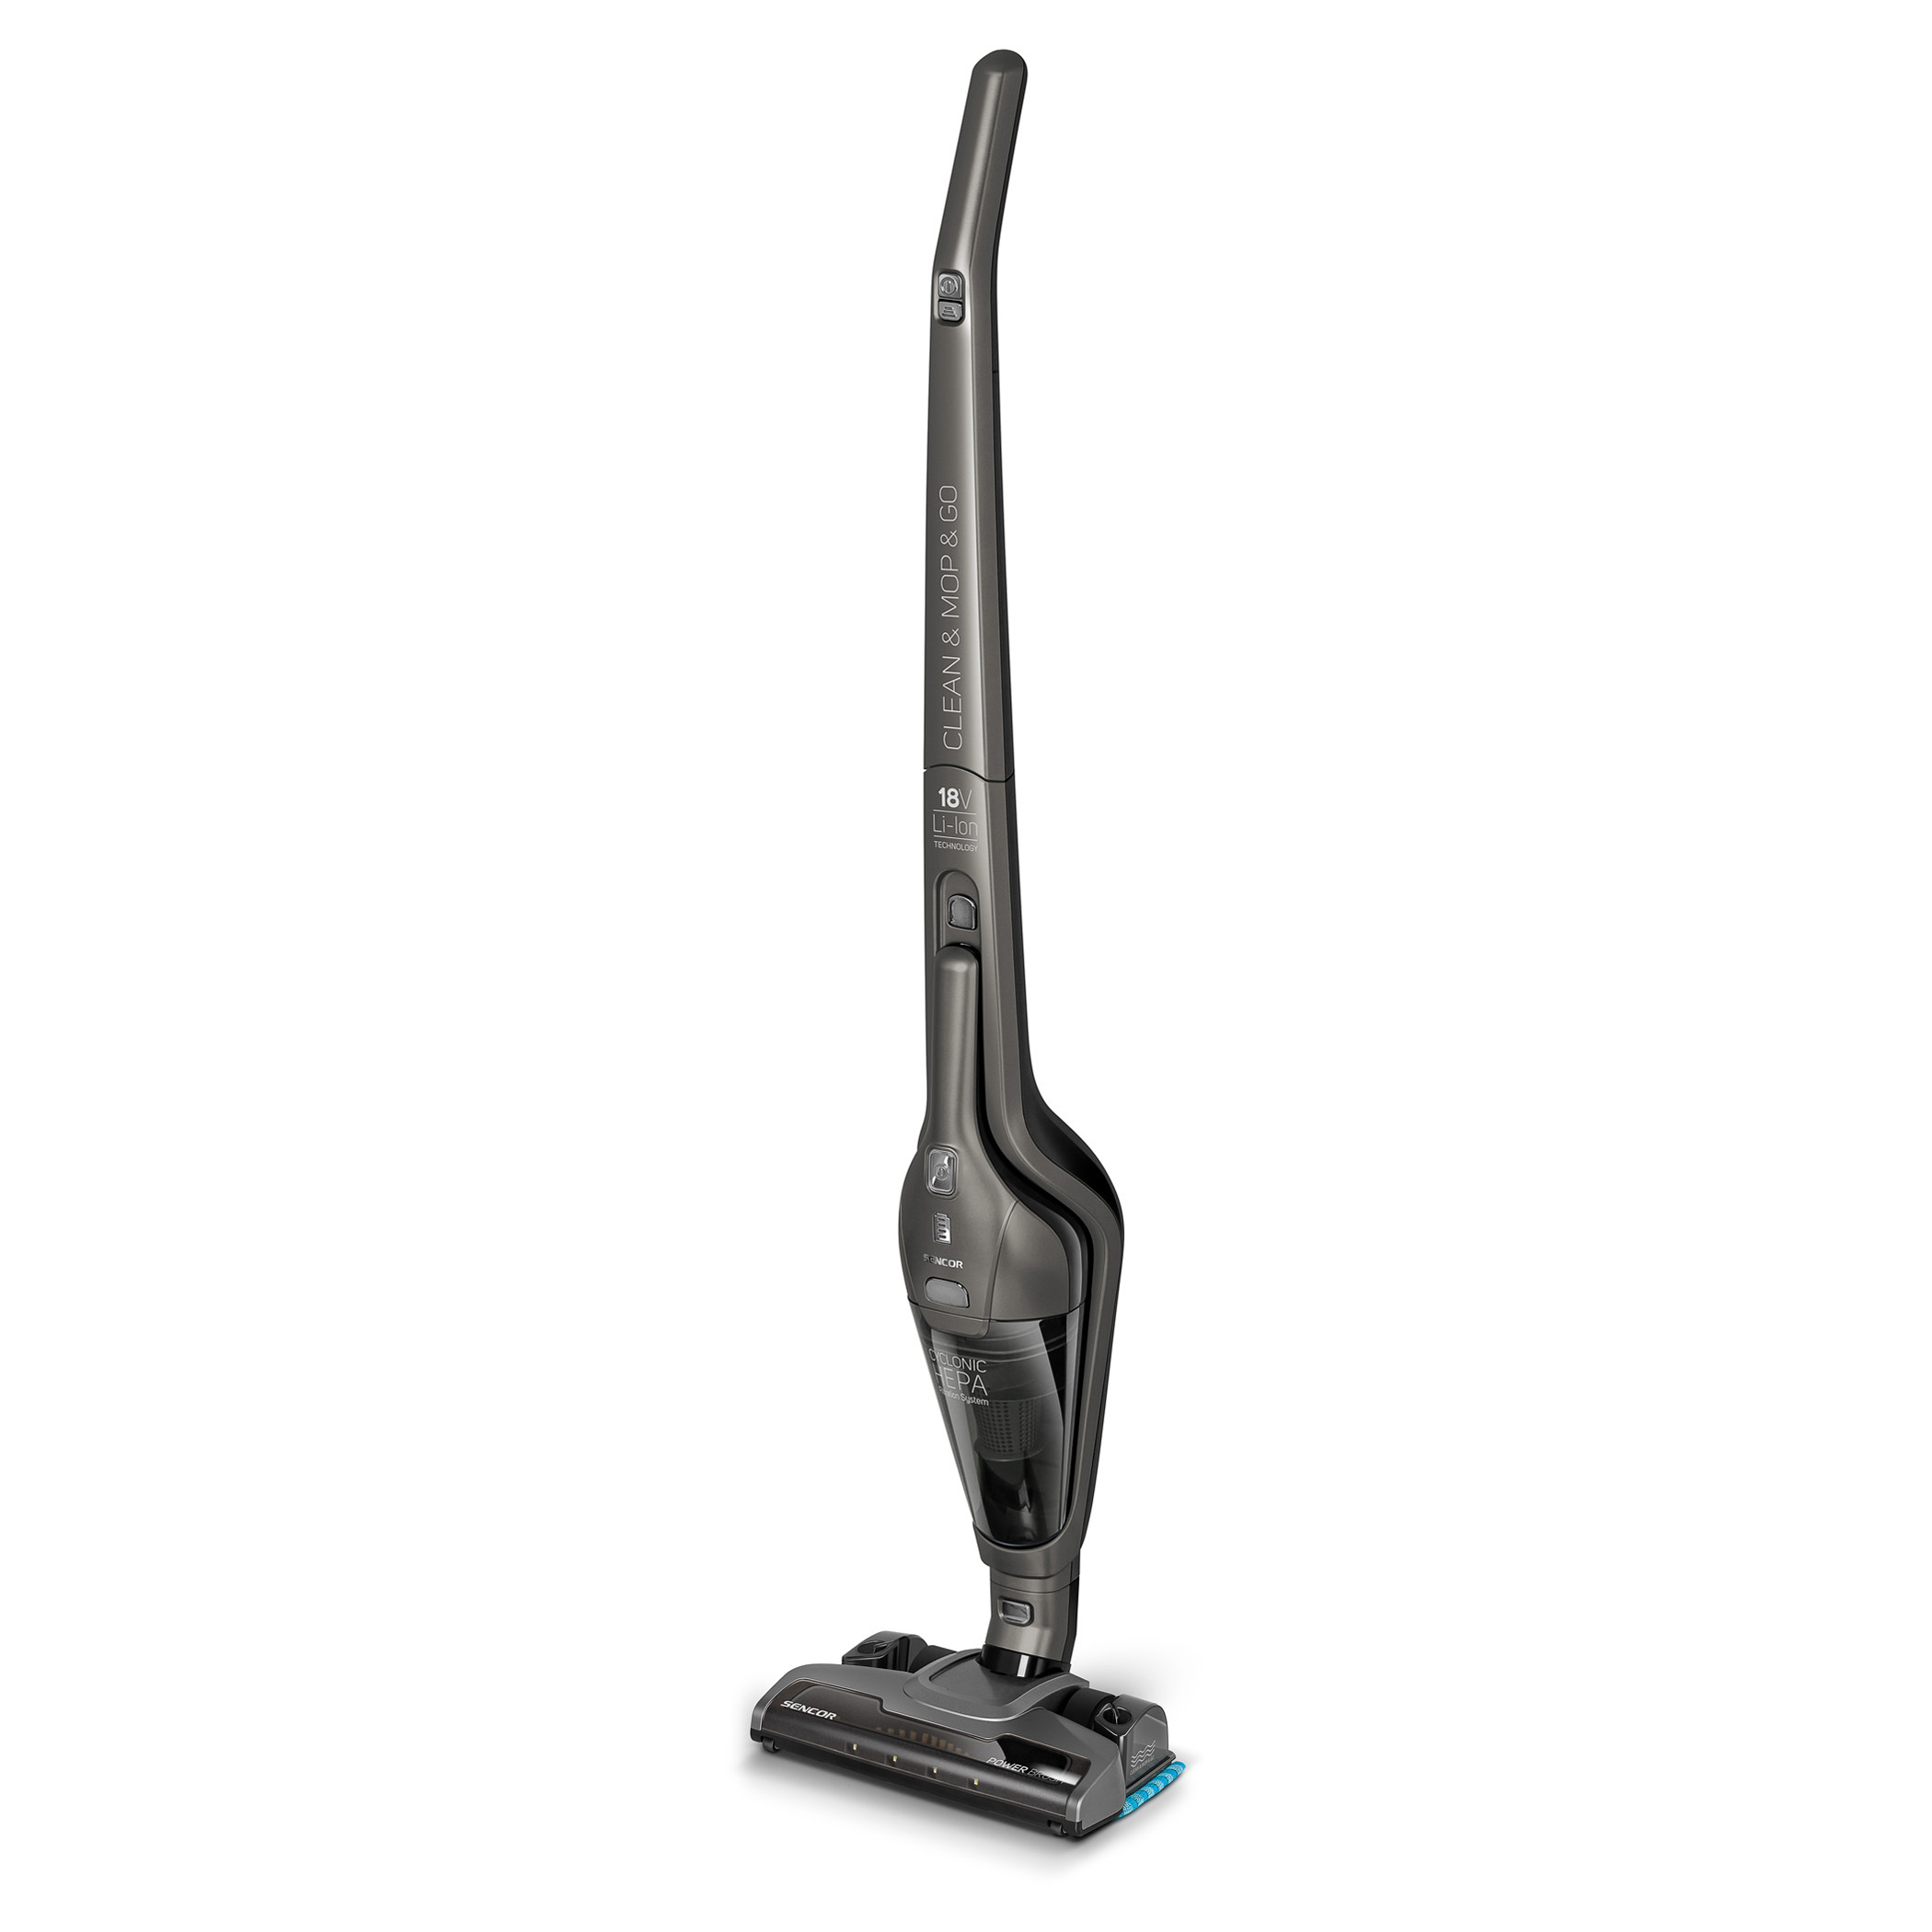 Basics Upright Bagless Lightweight Vacuum Cleaner, Black and White